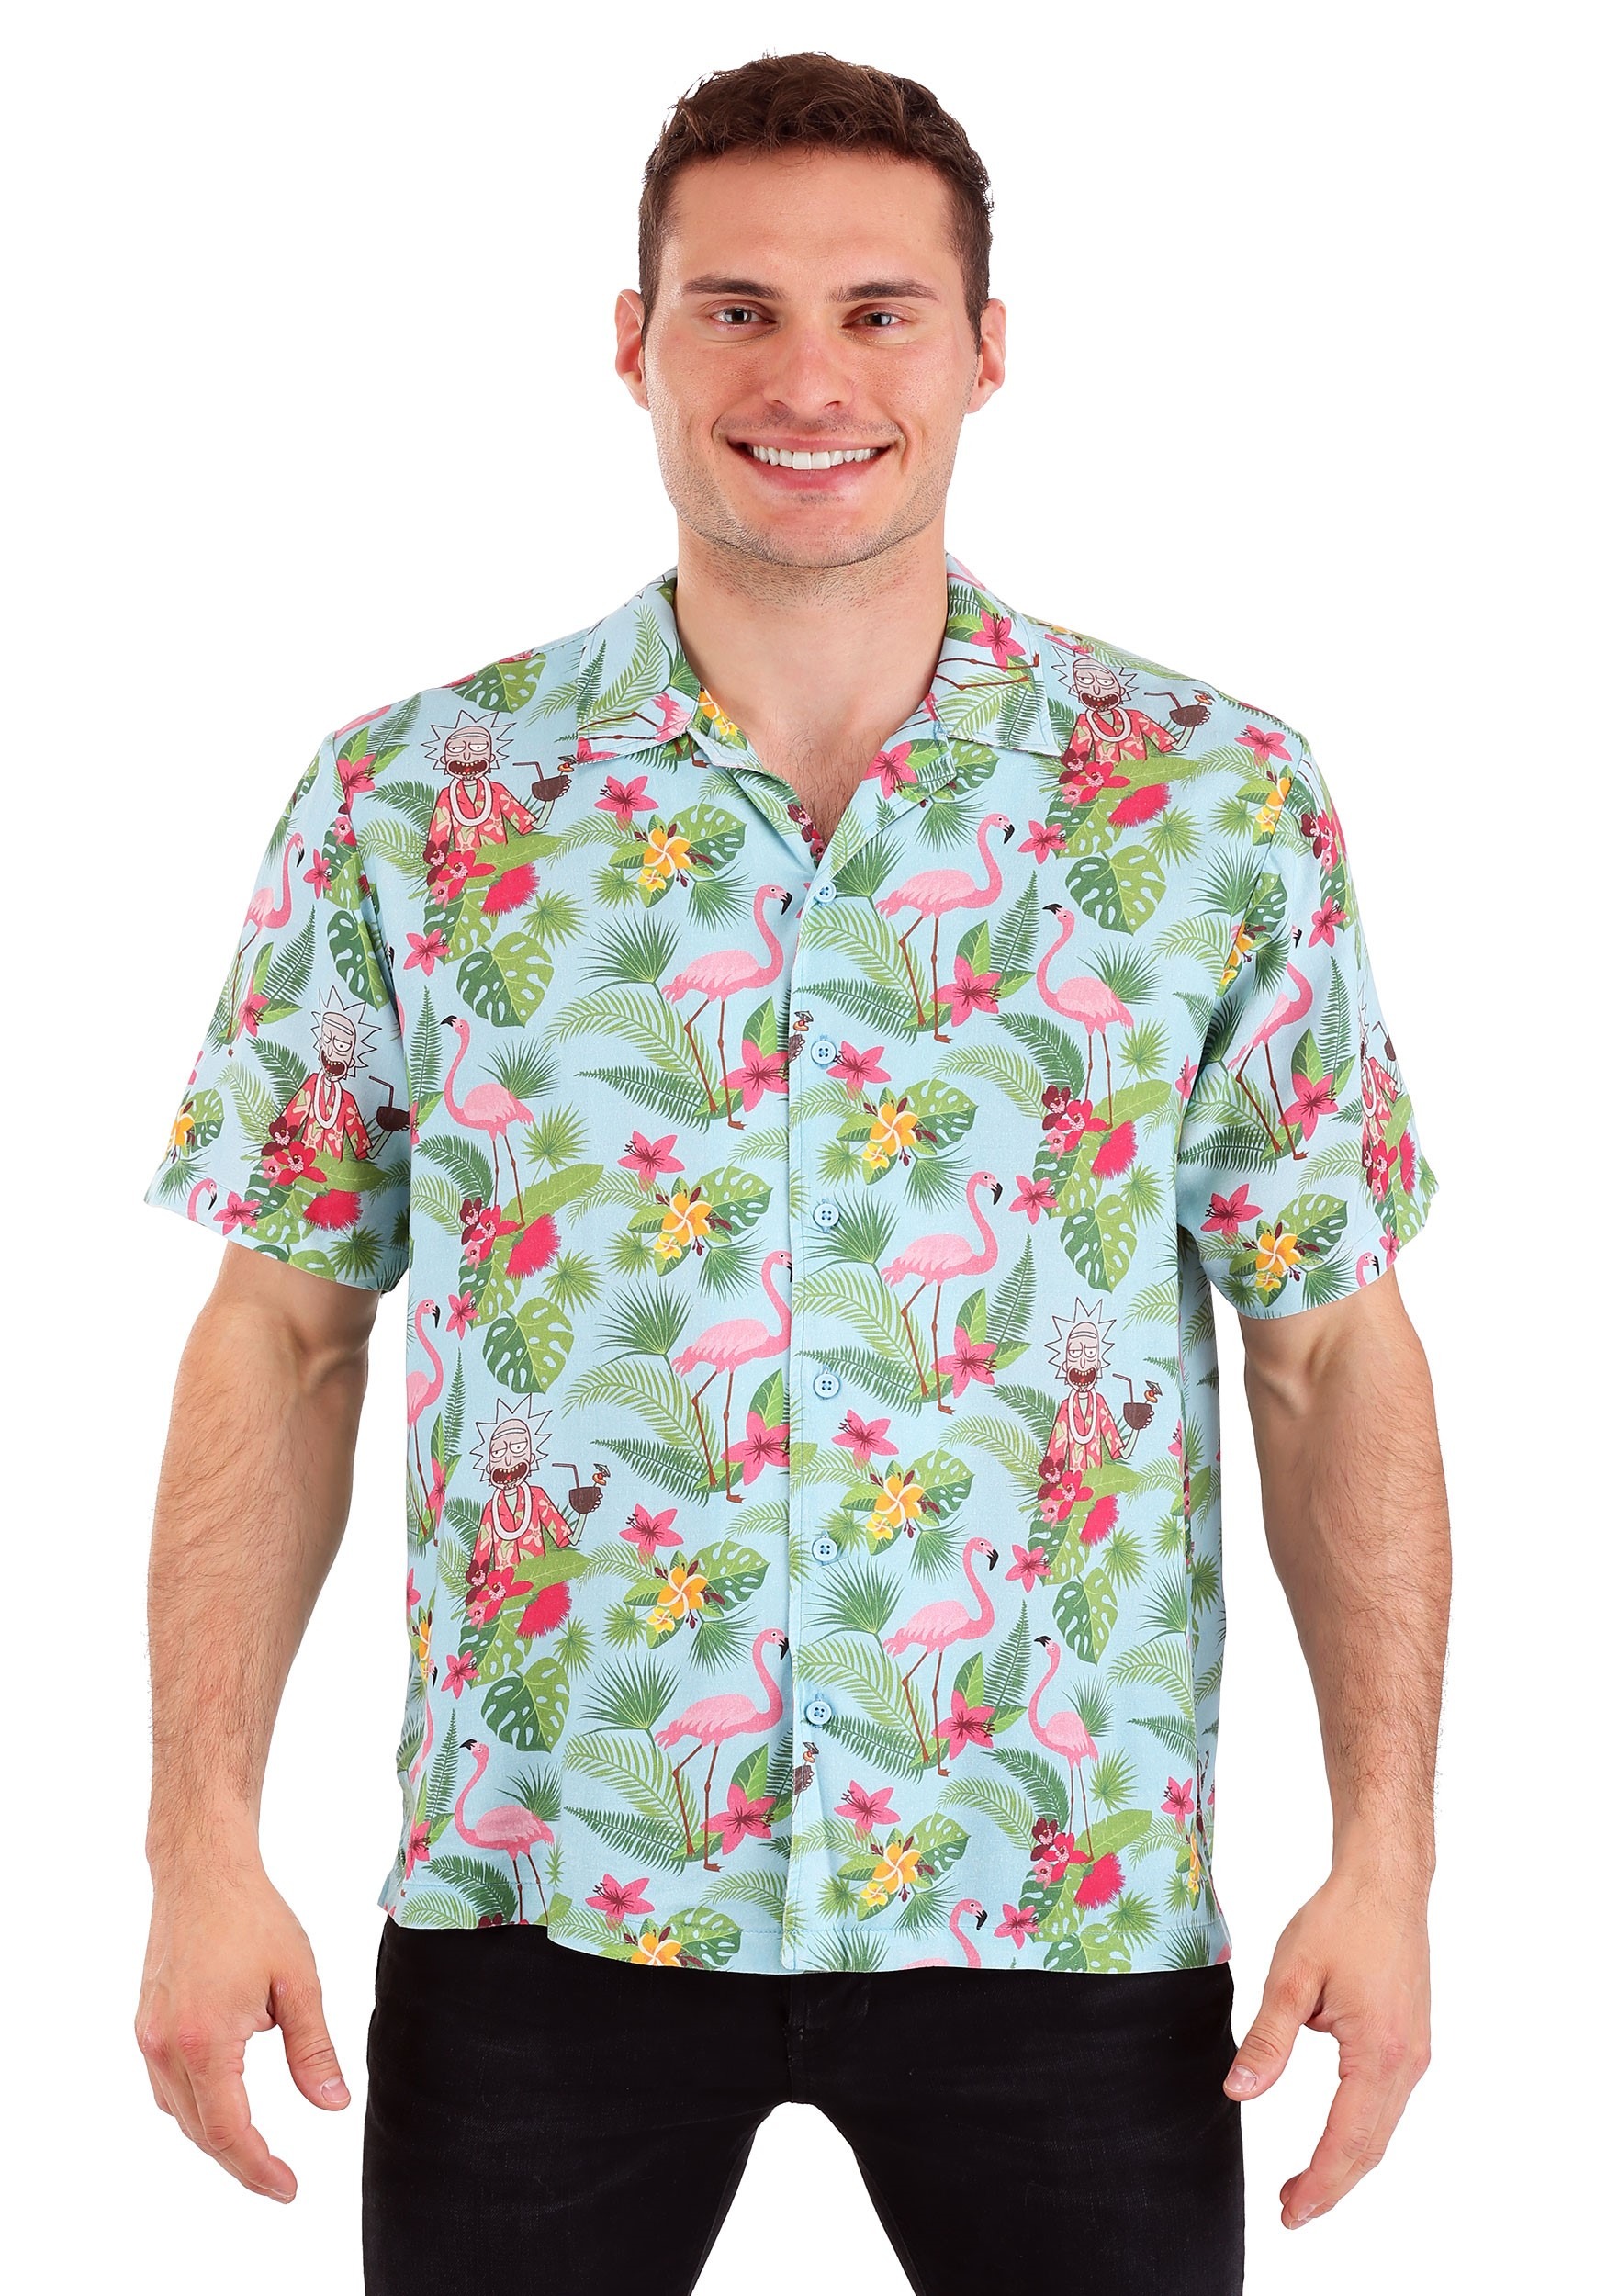 Rick Hawaiian Style Rick and Morty Woven Button Up